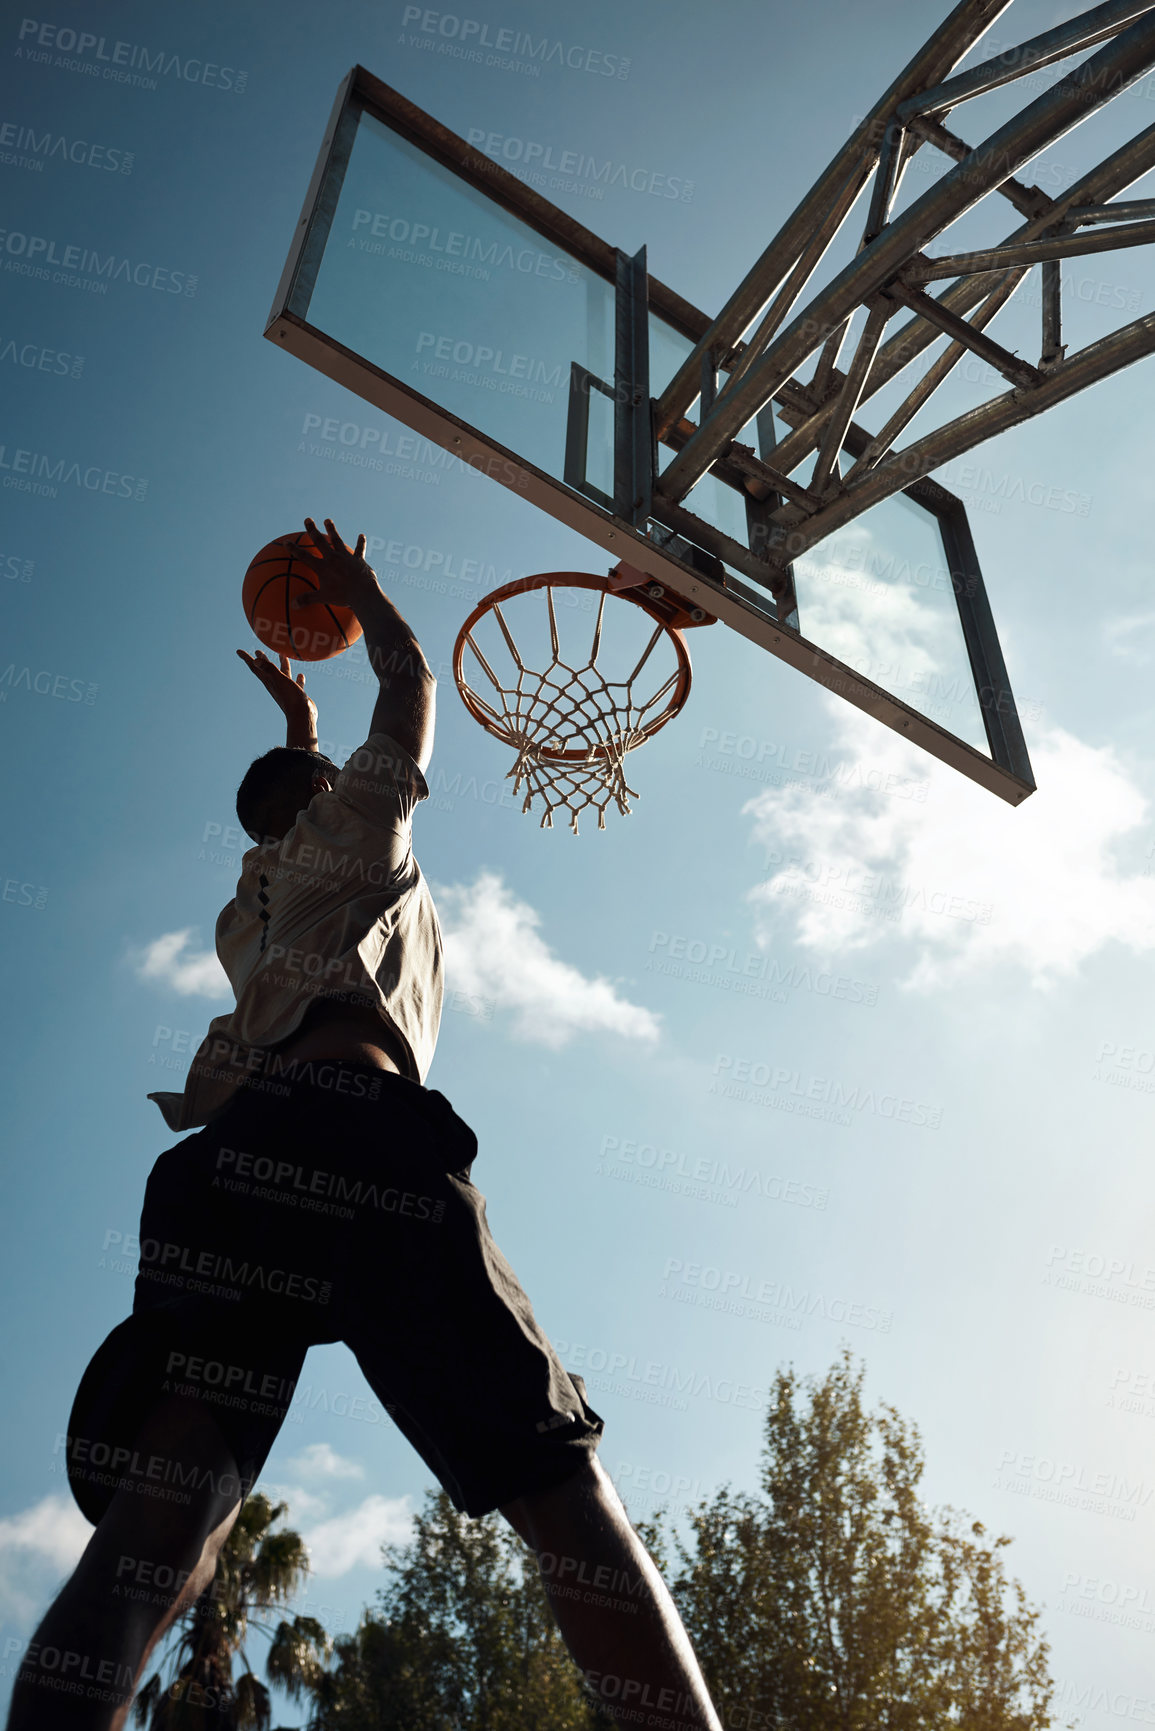 Buy stock photo Shot of a sporty young man playing basketball on a sports court